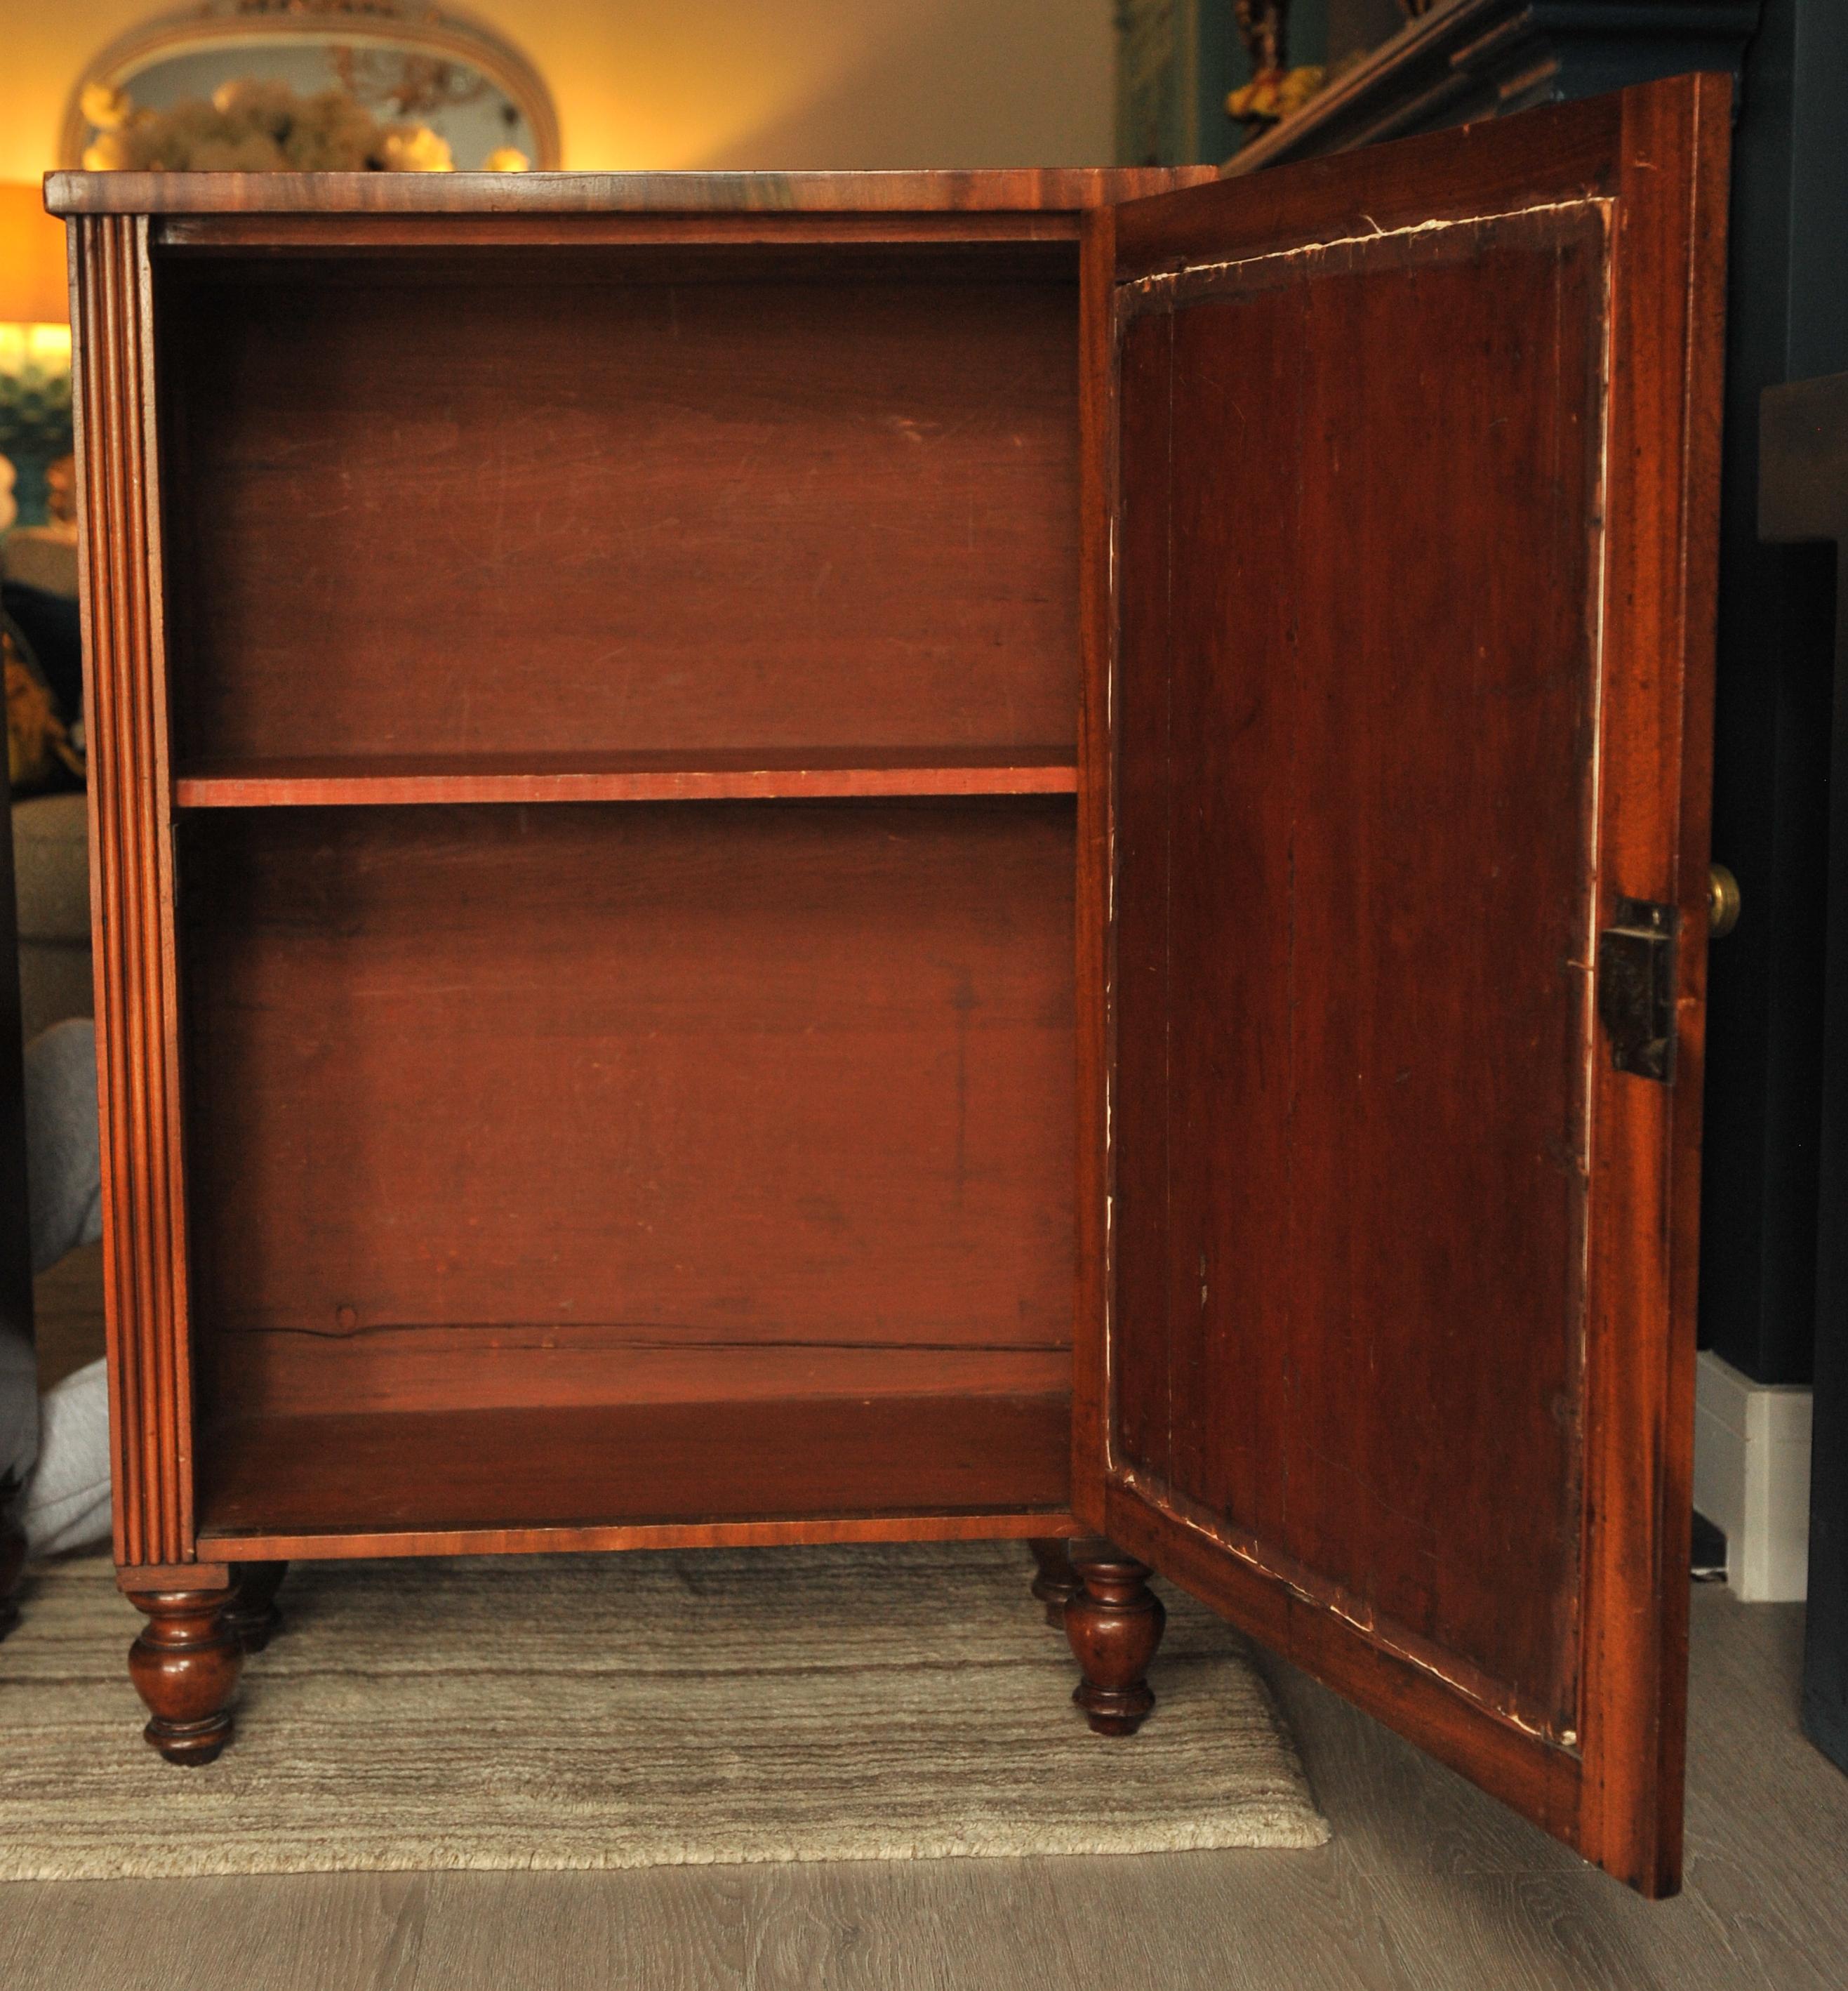 Rare Pair of Regency Period Mahogany Side Cabinets with Brass Lattice Fronts For Sale 1